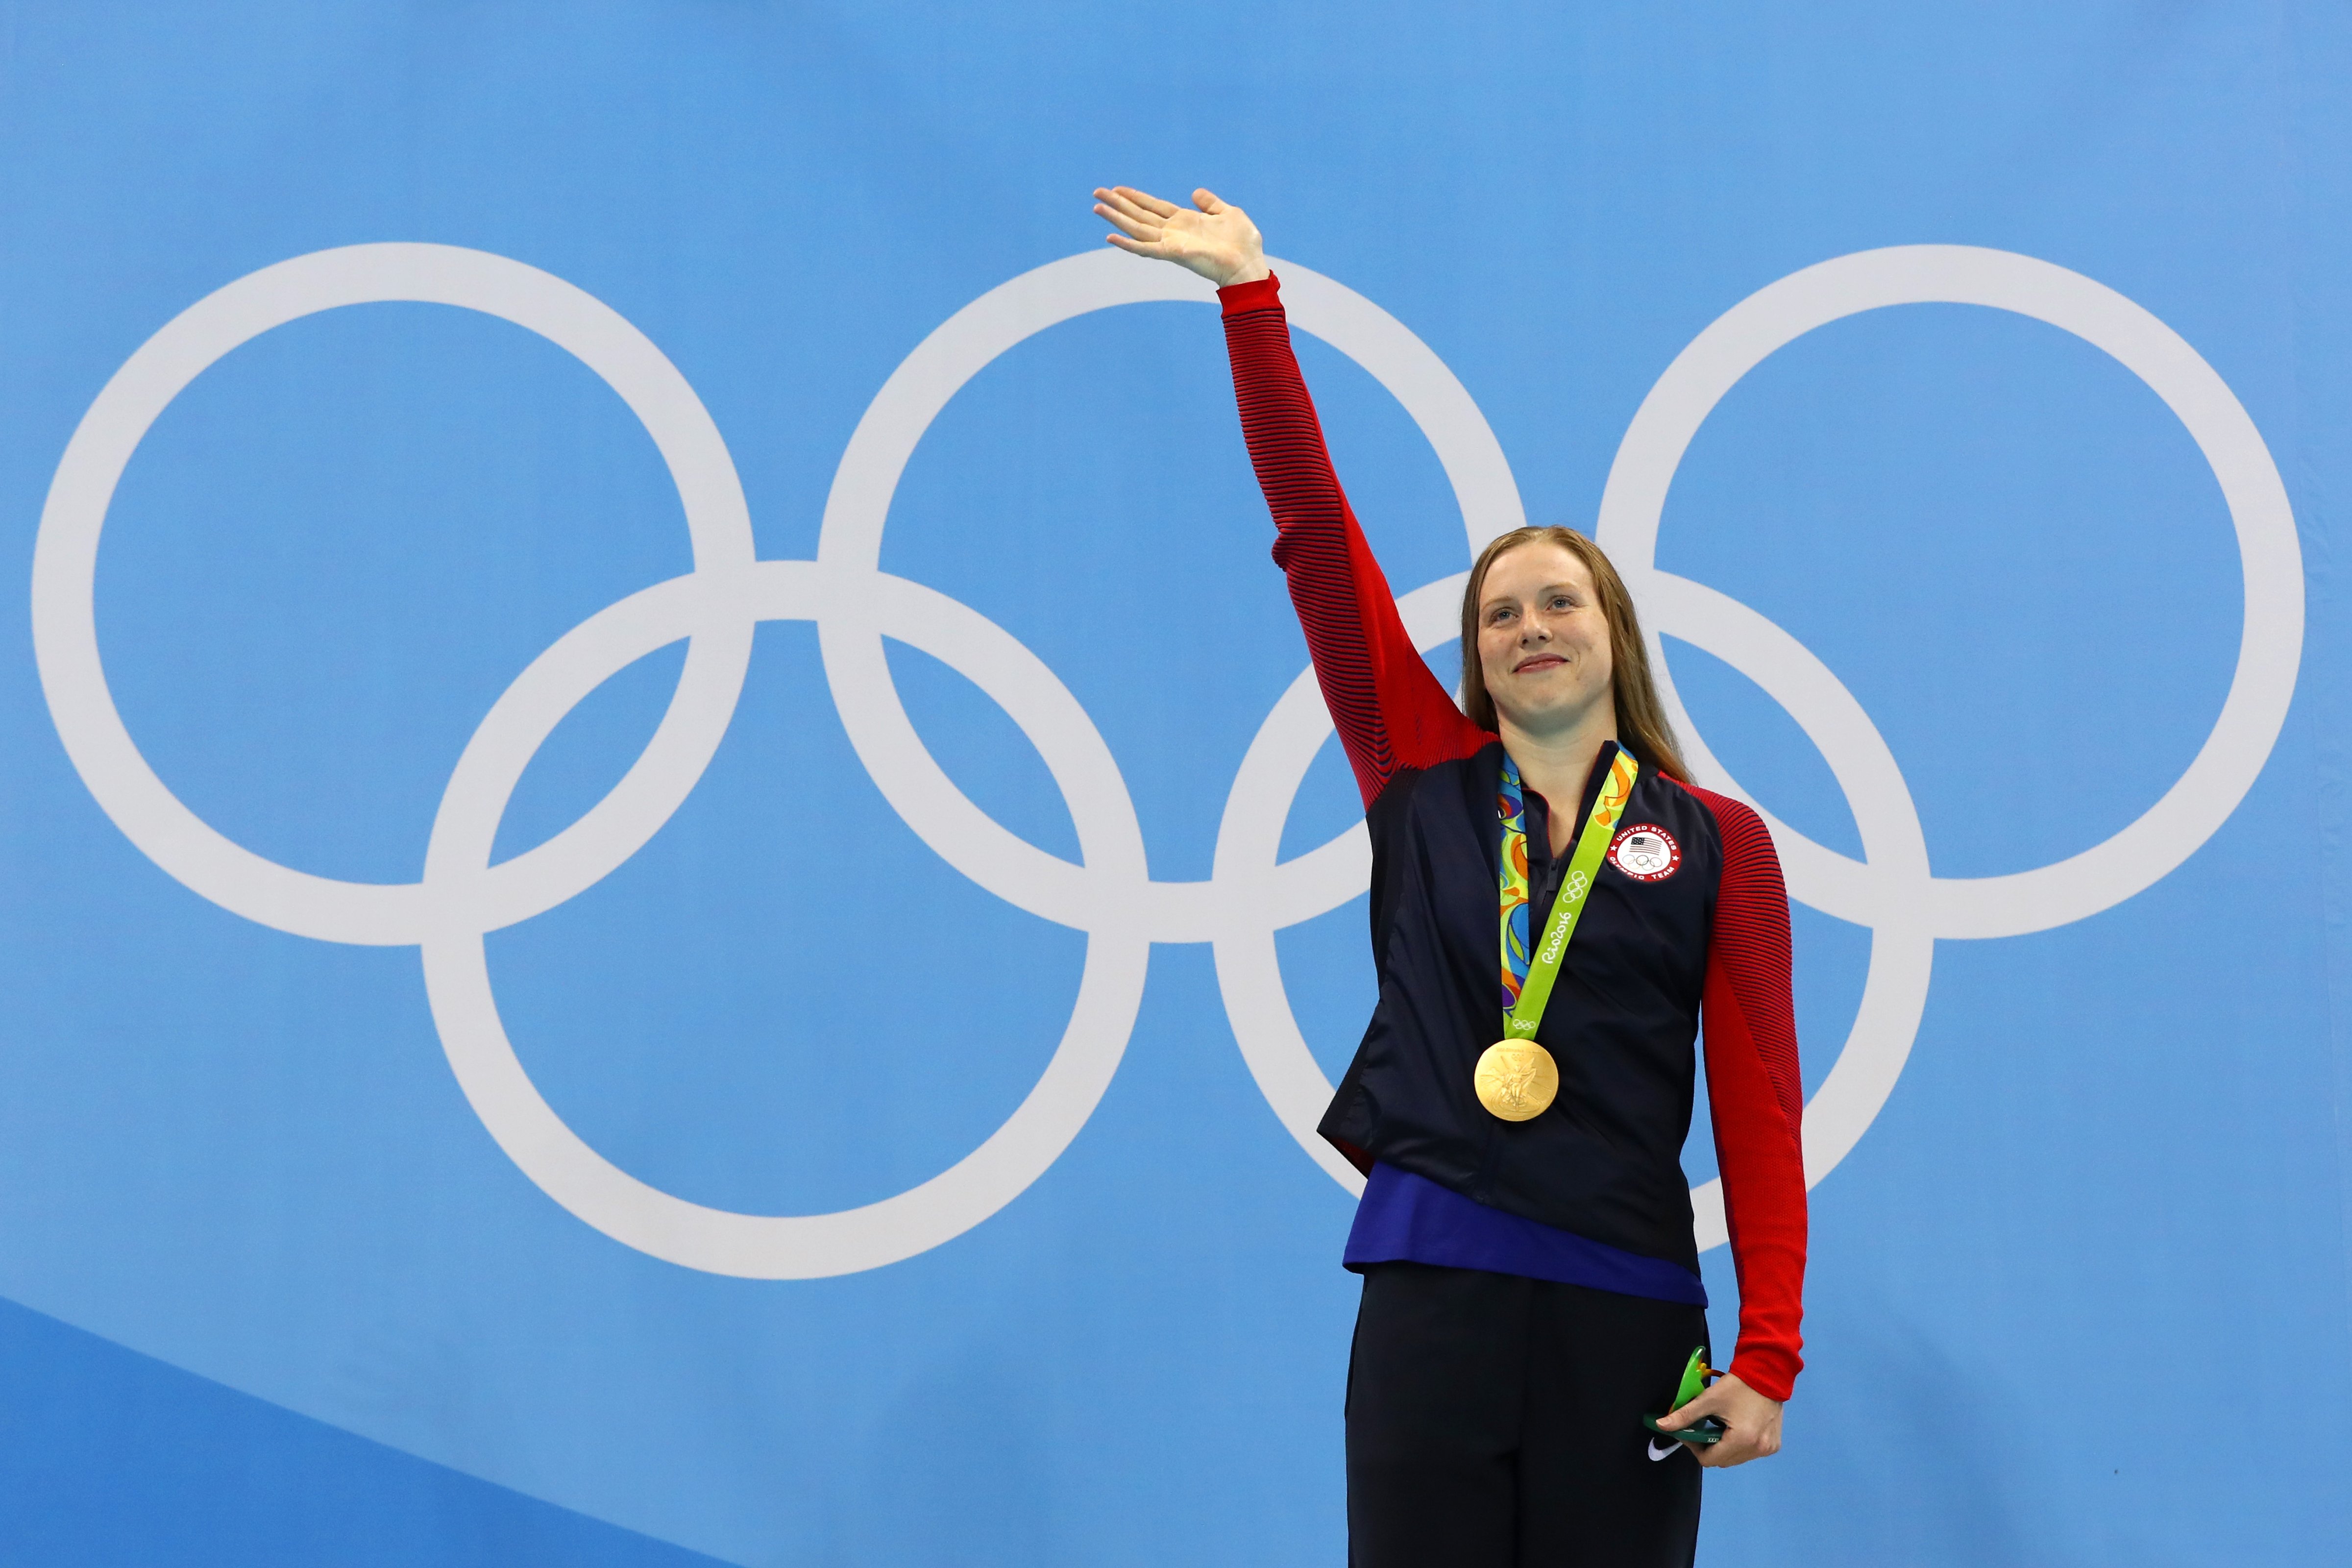 Gold medalist Lilly King of the United States poses during the medal ceremony for the Women's 100m Breaststroke Final on Day 3 of the Rio 2016 Olympic Games at the Olympic Aquatics Stadium in Rio de Janeiro on Aug. 8, 2016. (Al Bello—Getty Images)